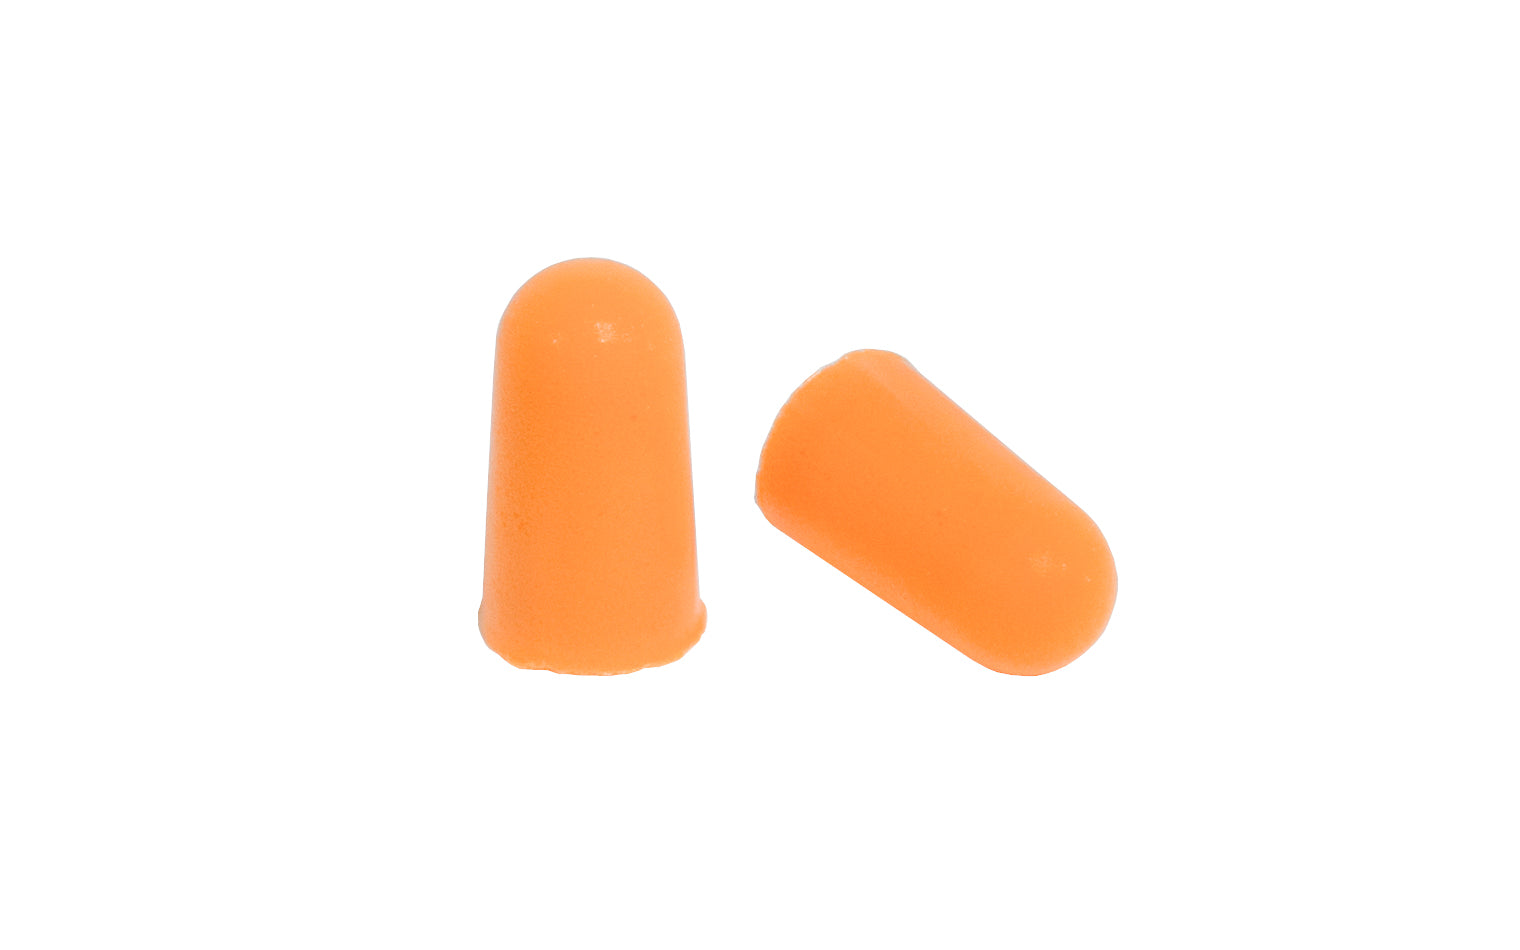 3M Disposable Foam uncorded Earplugs are made from slow-recovery foam, help provide a combination of comfort & hearing protection for users. They are easy to insert into ears where the slow recovery foam expands to fit the ear canals. Noise Reduction Rating (NRR) of 29 dB. Model No. 1100. One Box - Sold as 200 pairs